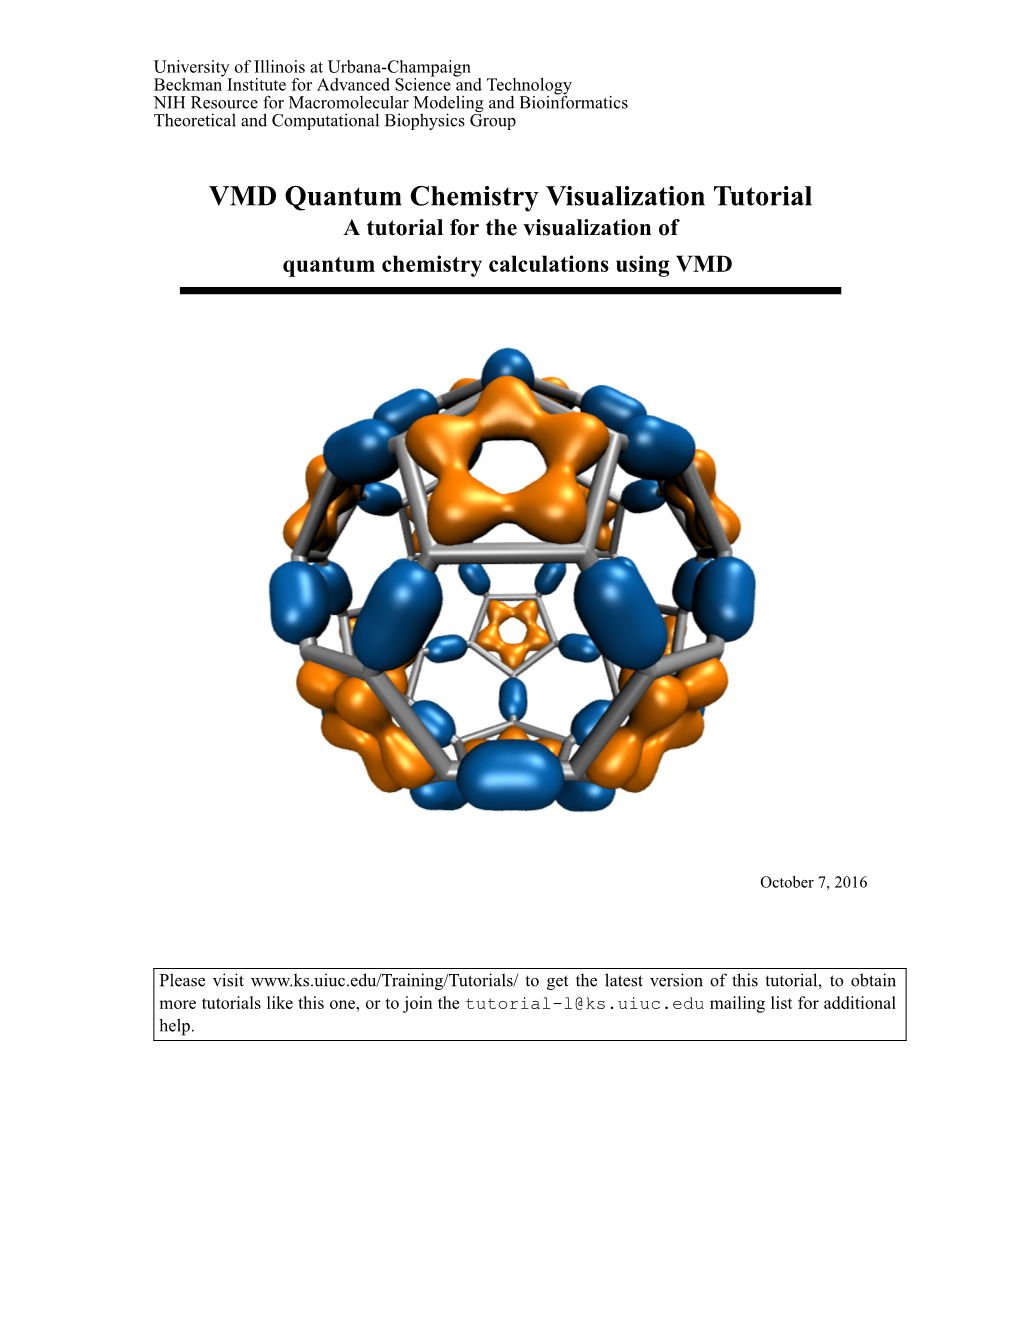 VMD Quantum Chemistry Visualization Tutorial a Tutorial for the Visualization of Quantum Chemistry Calculations Using VMD